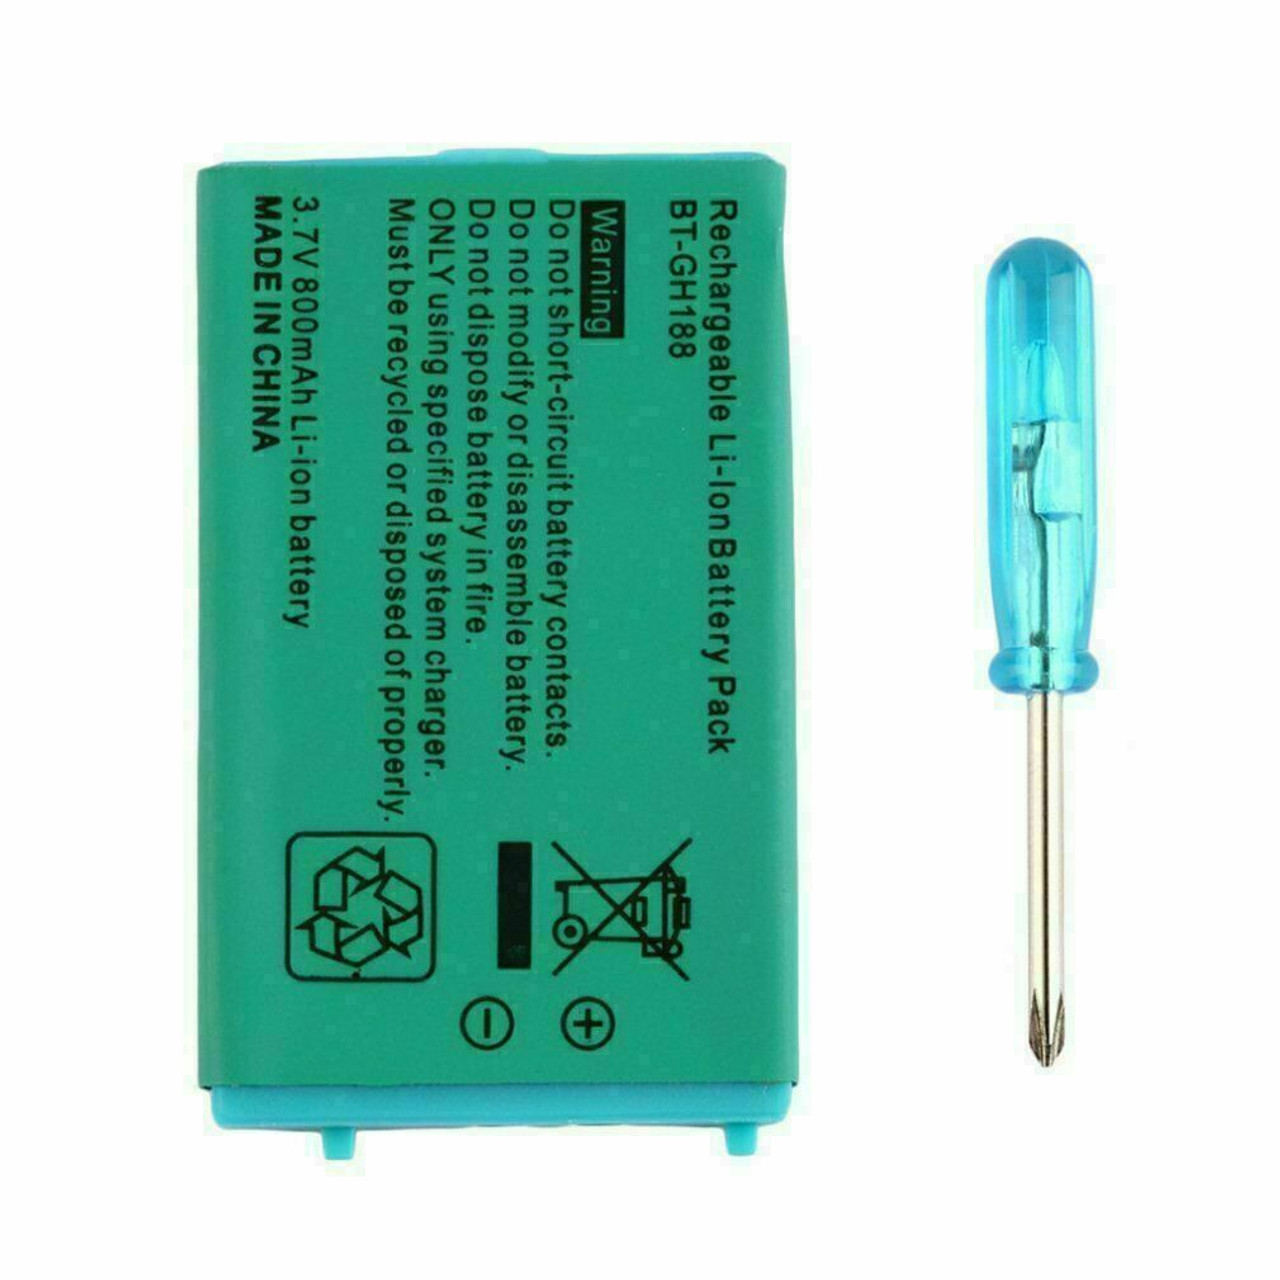 New Rechargeable Battery For Nintendo Game Boy Advance SP Systems + Screwdriver